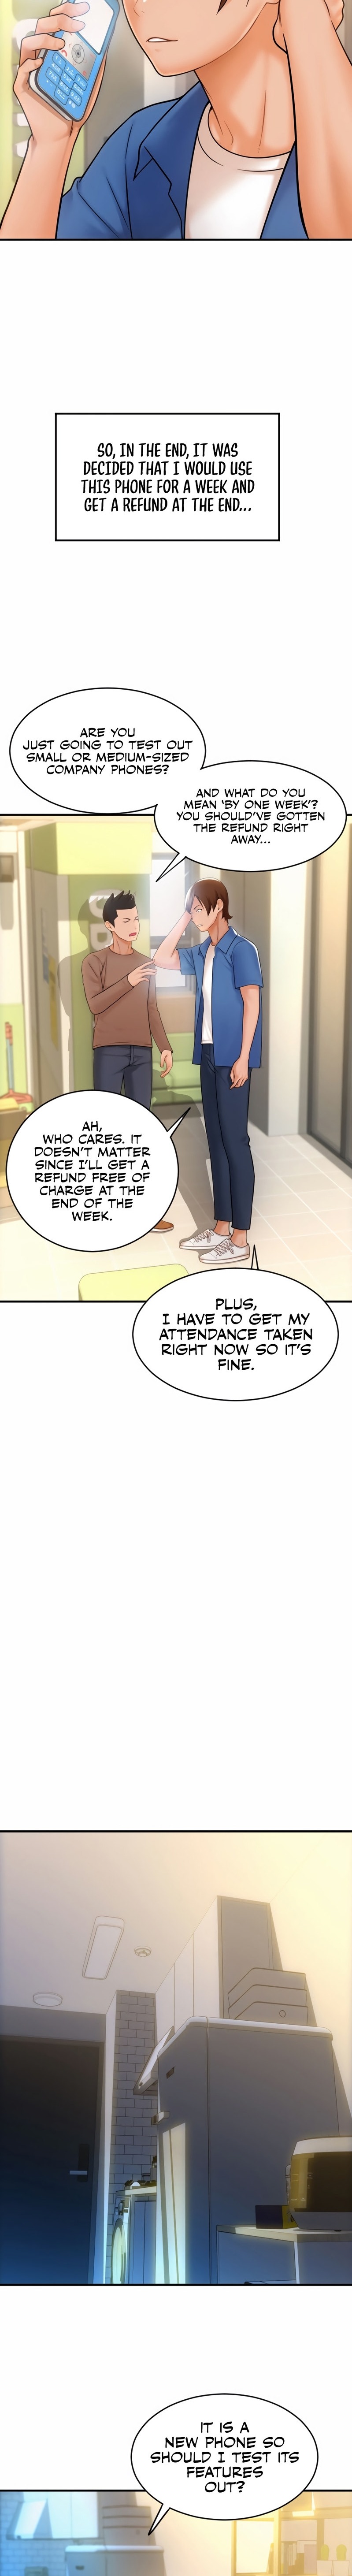 Pay with Sperm Pay - Chapter 1 Page 22